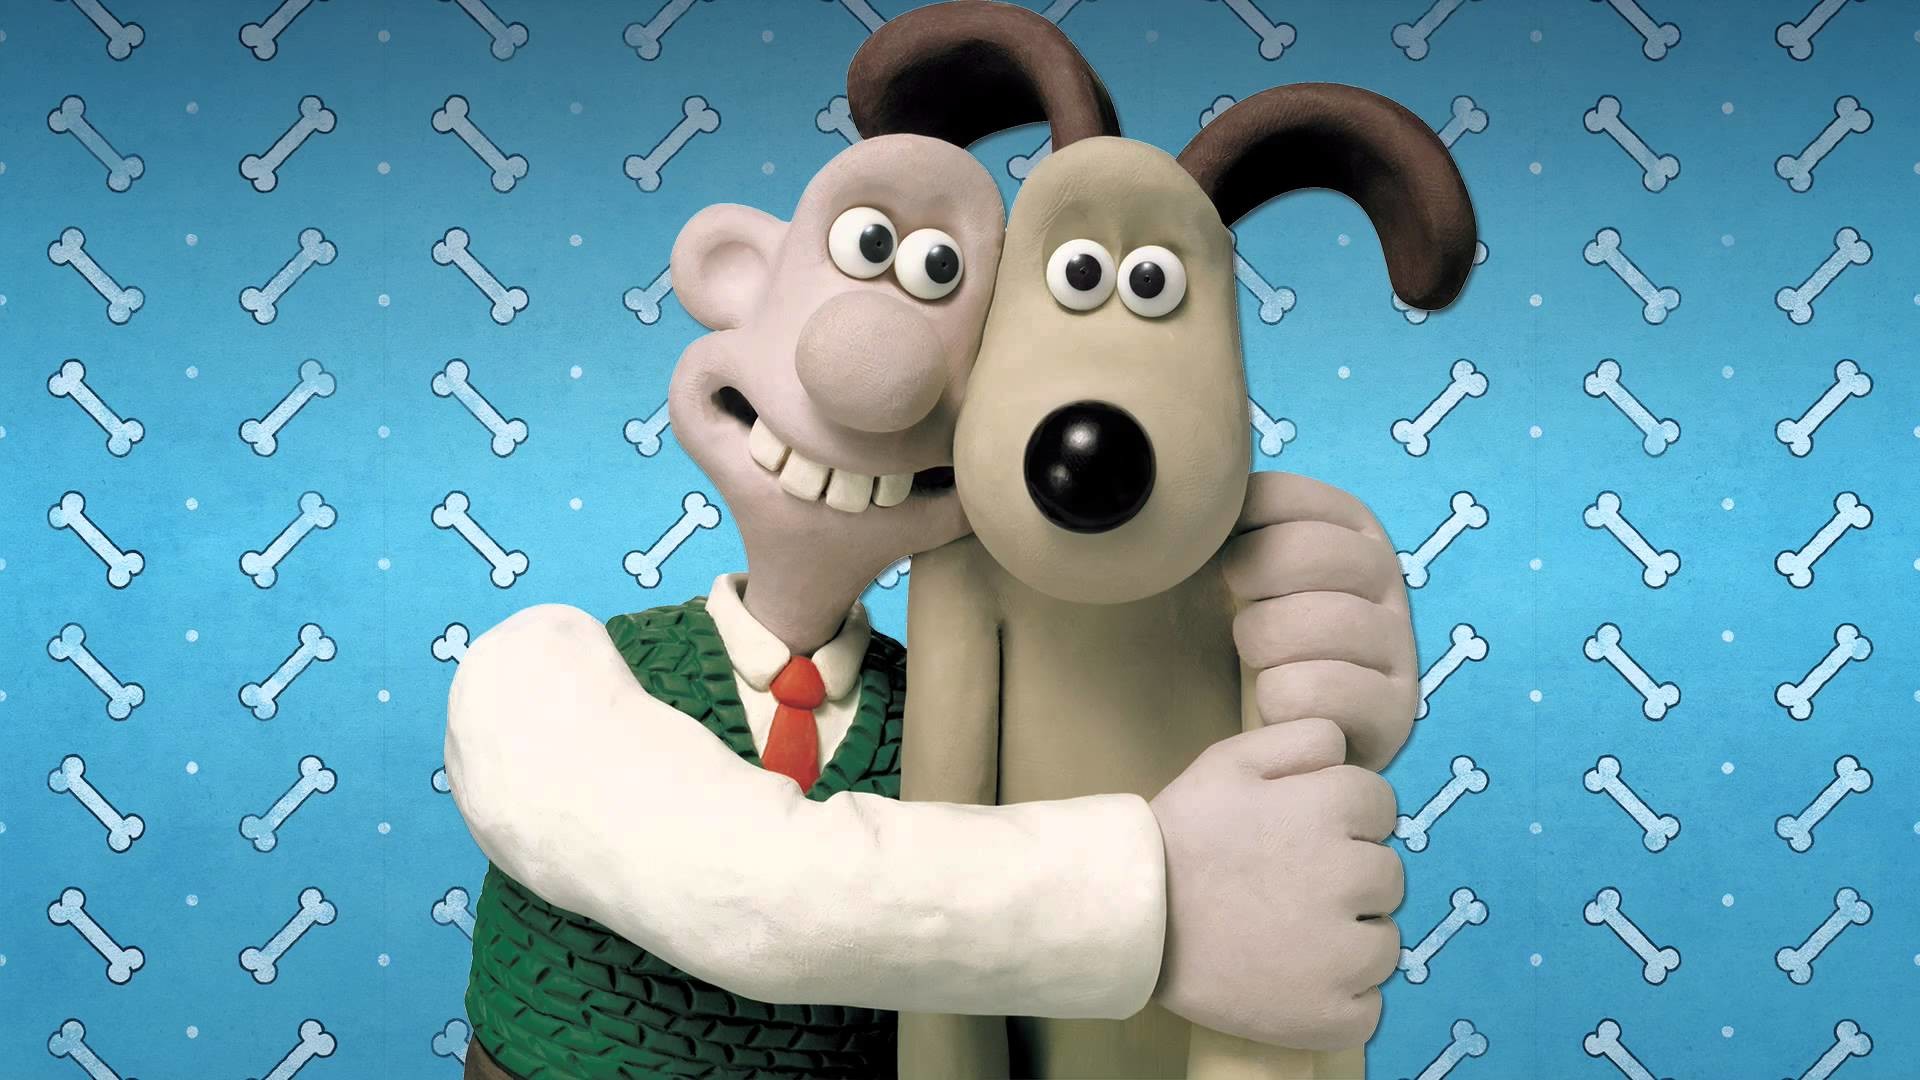 1920x1080 Wallace and Gromit Theme 8-Bit